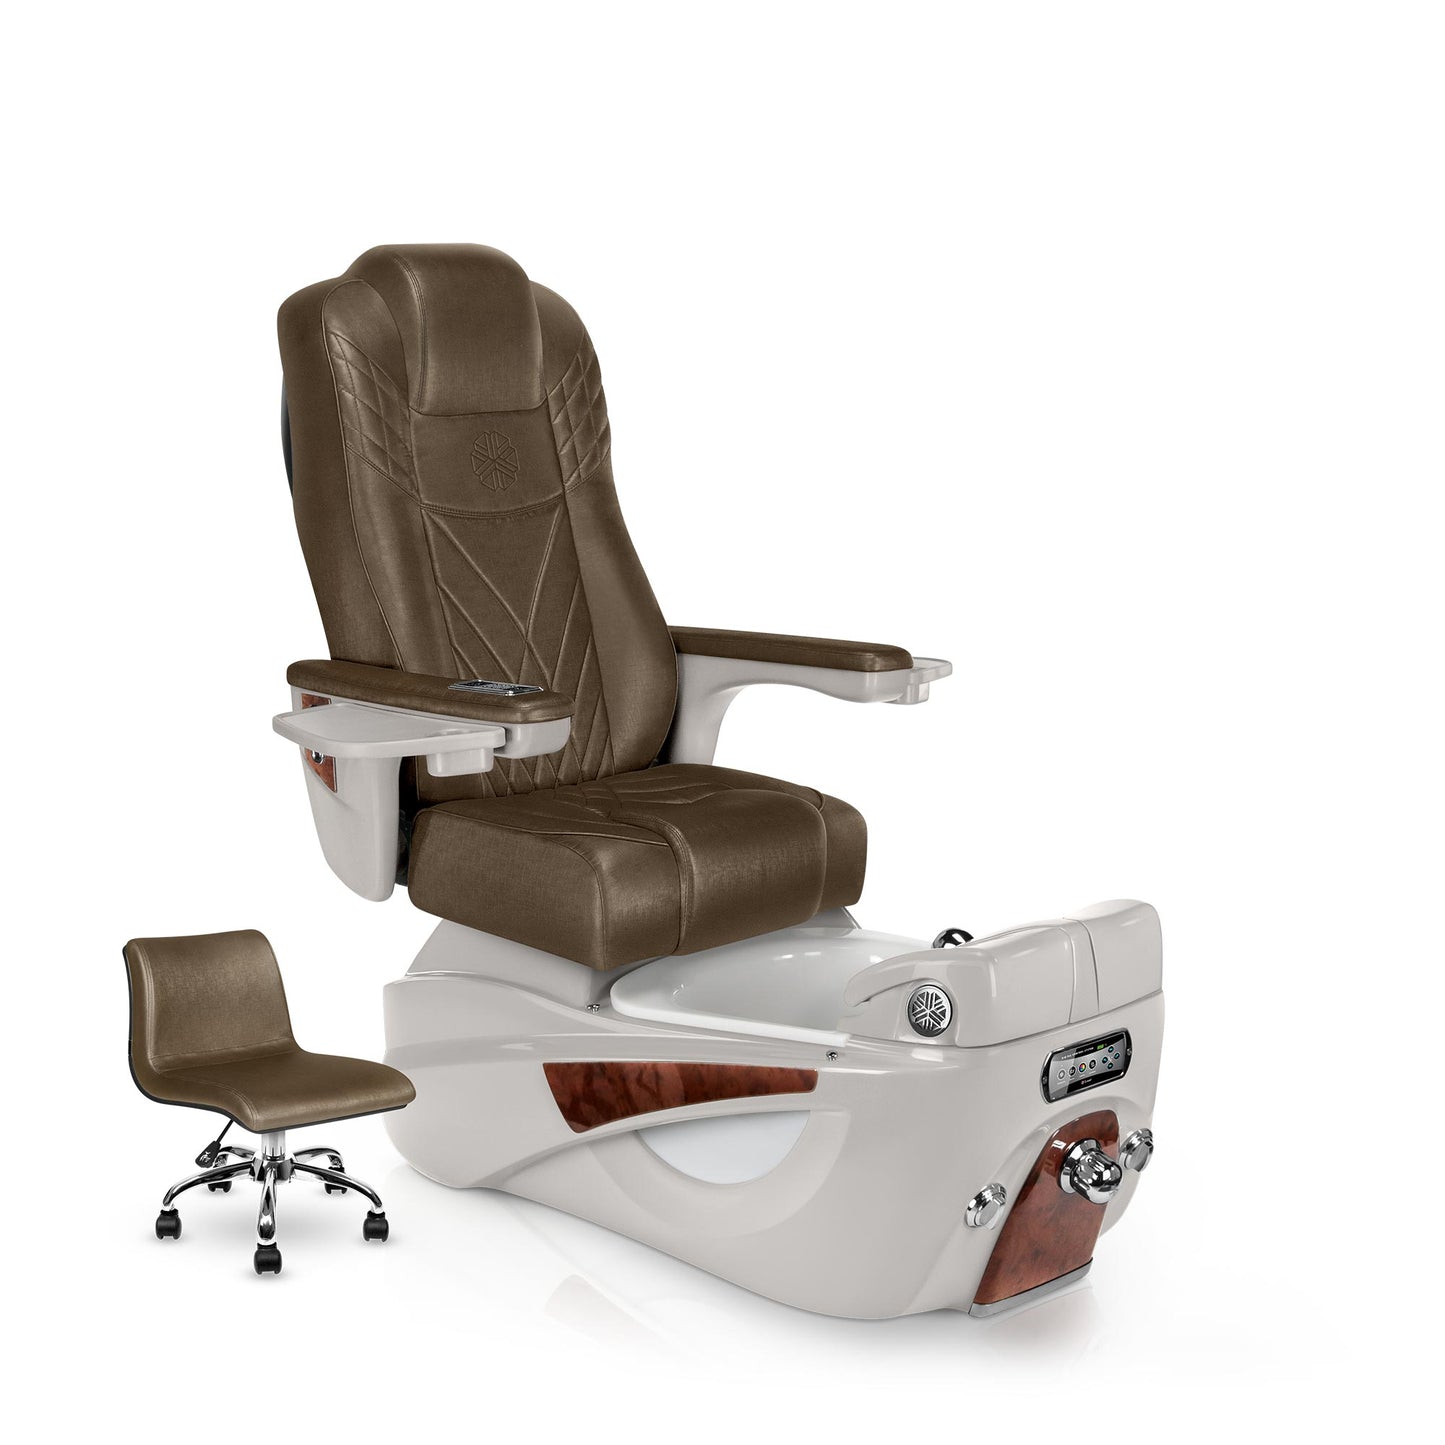 Lexor LUMINOUS pedicure chair with cola cushion and sandstone spa base